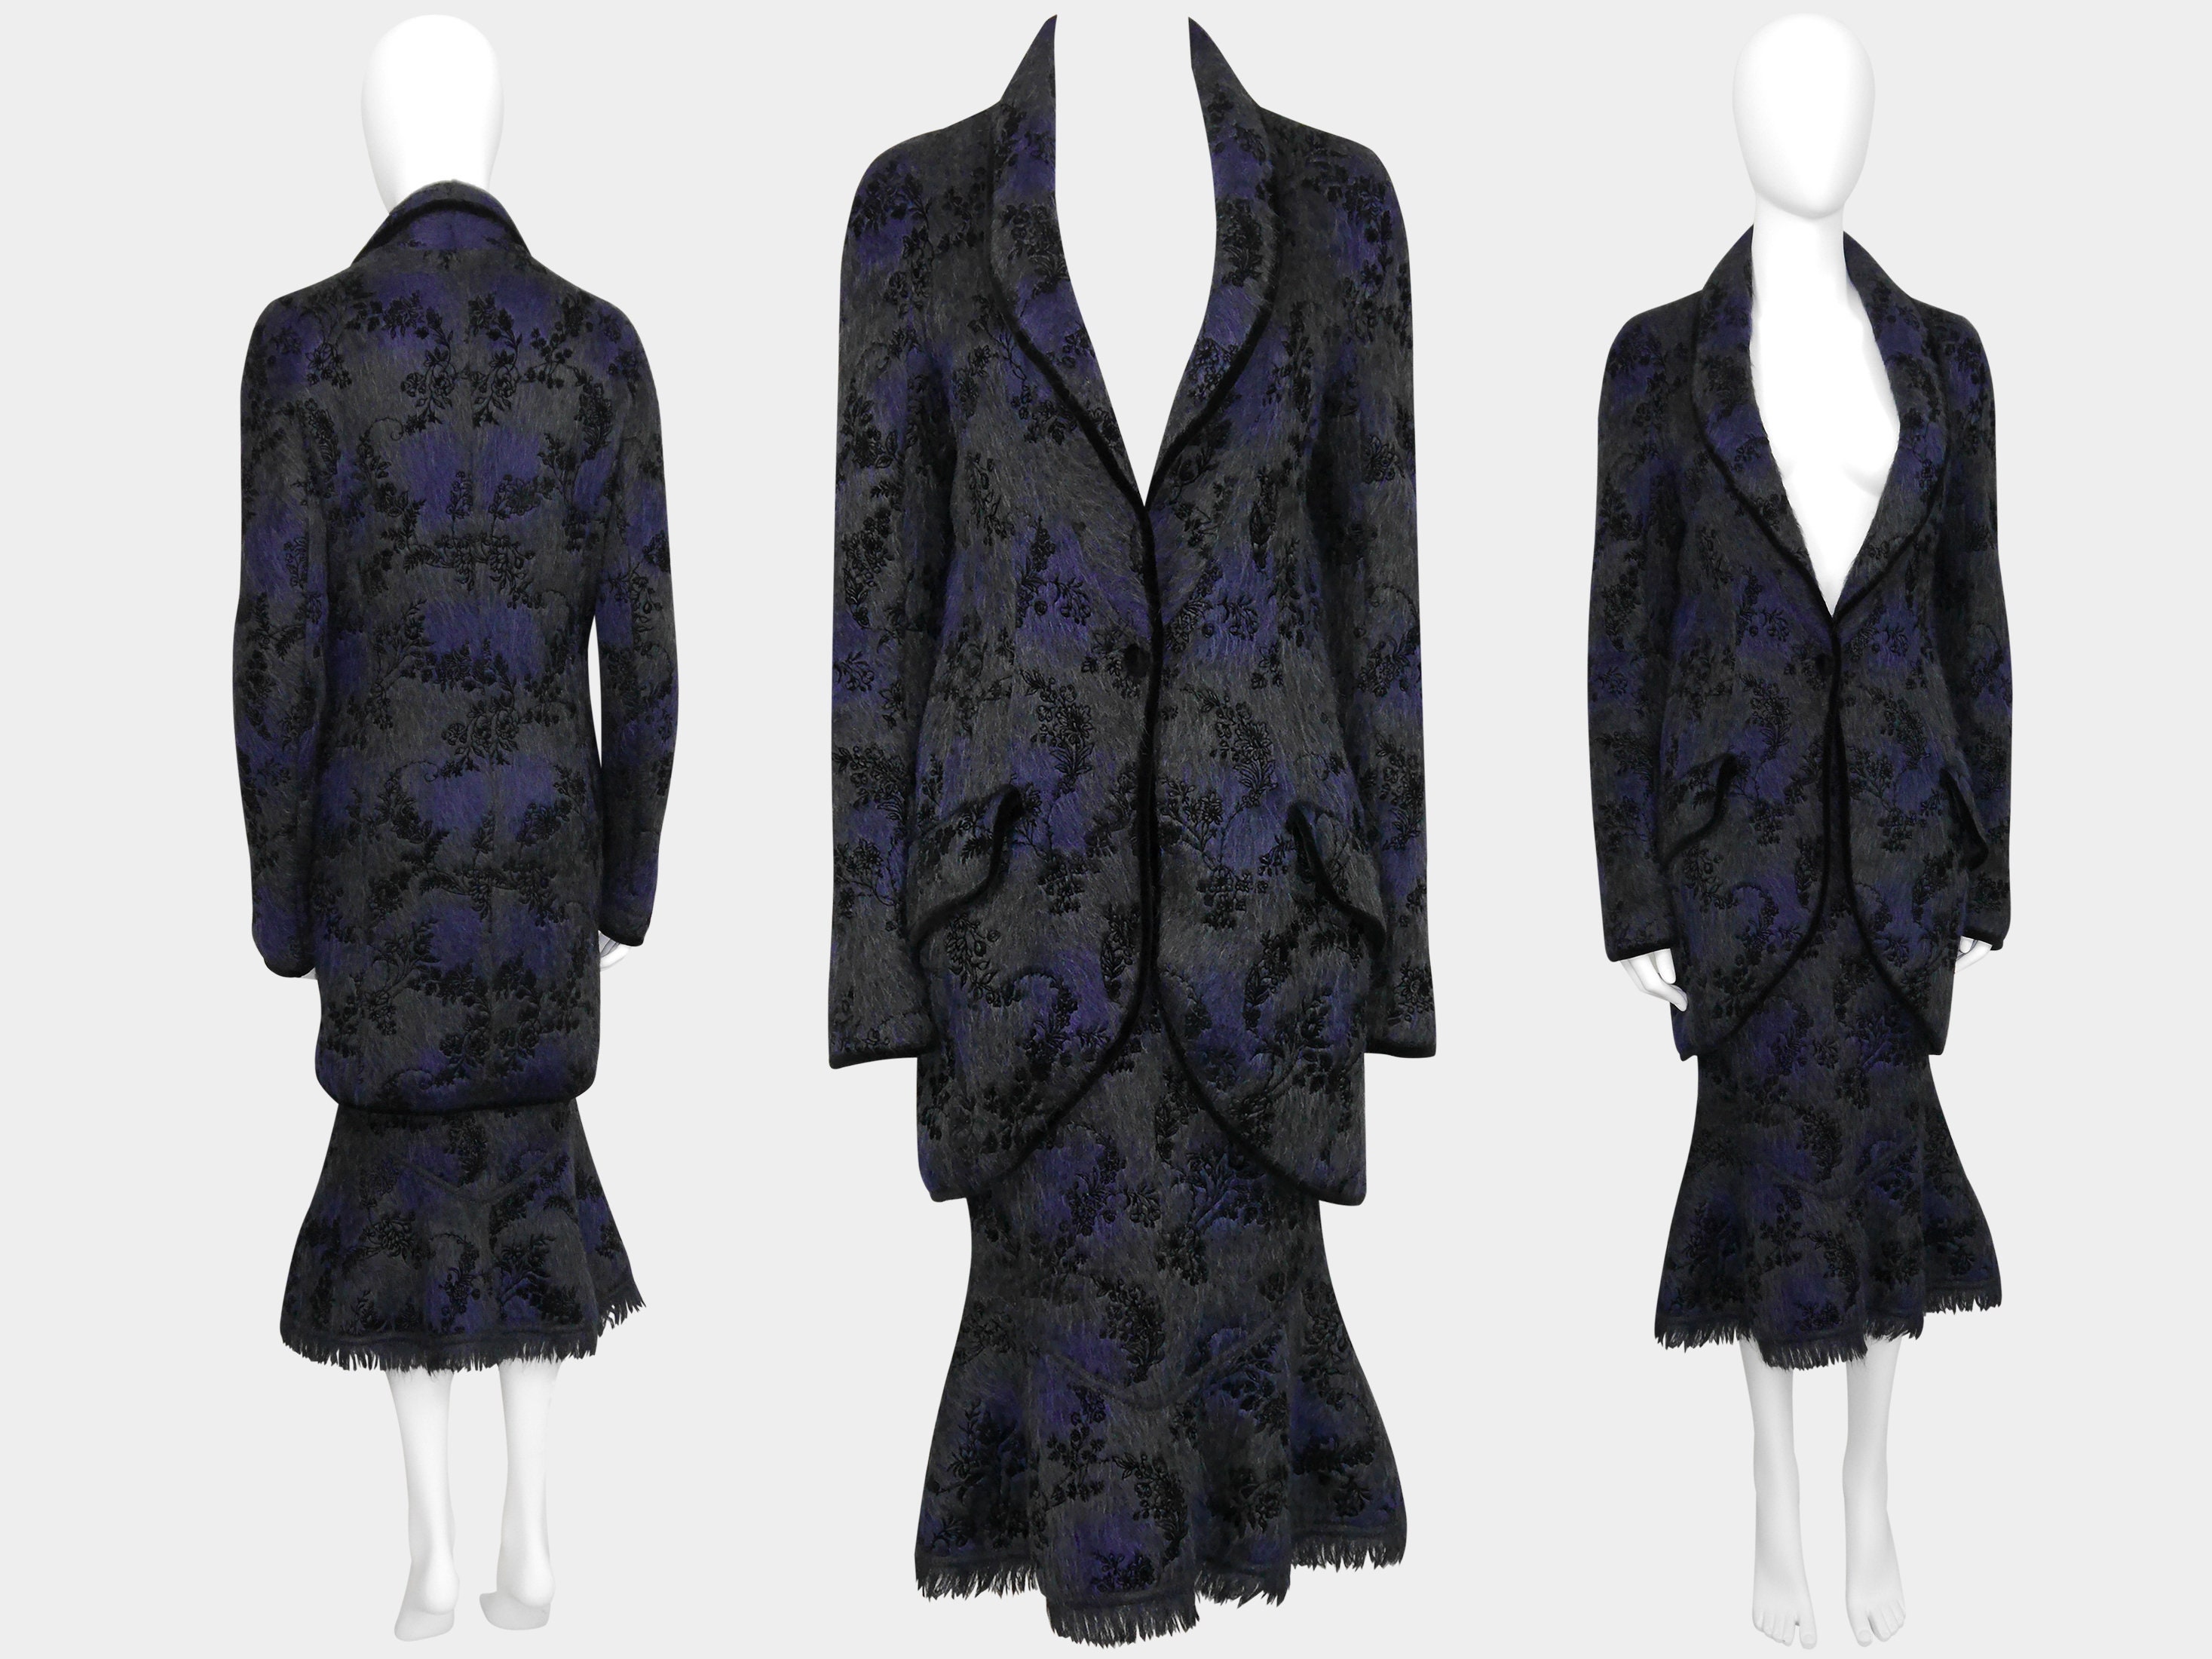 GIVENCHY COUTURE A/W 1997 ALEXANDER McQUEEN Purple Floral Jacquard Blazer  Jacket